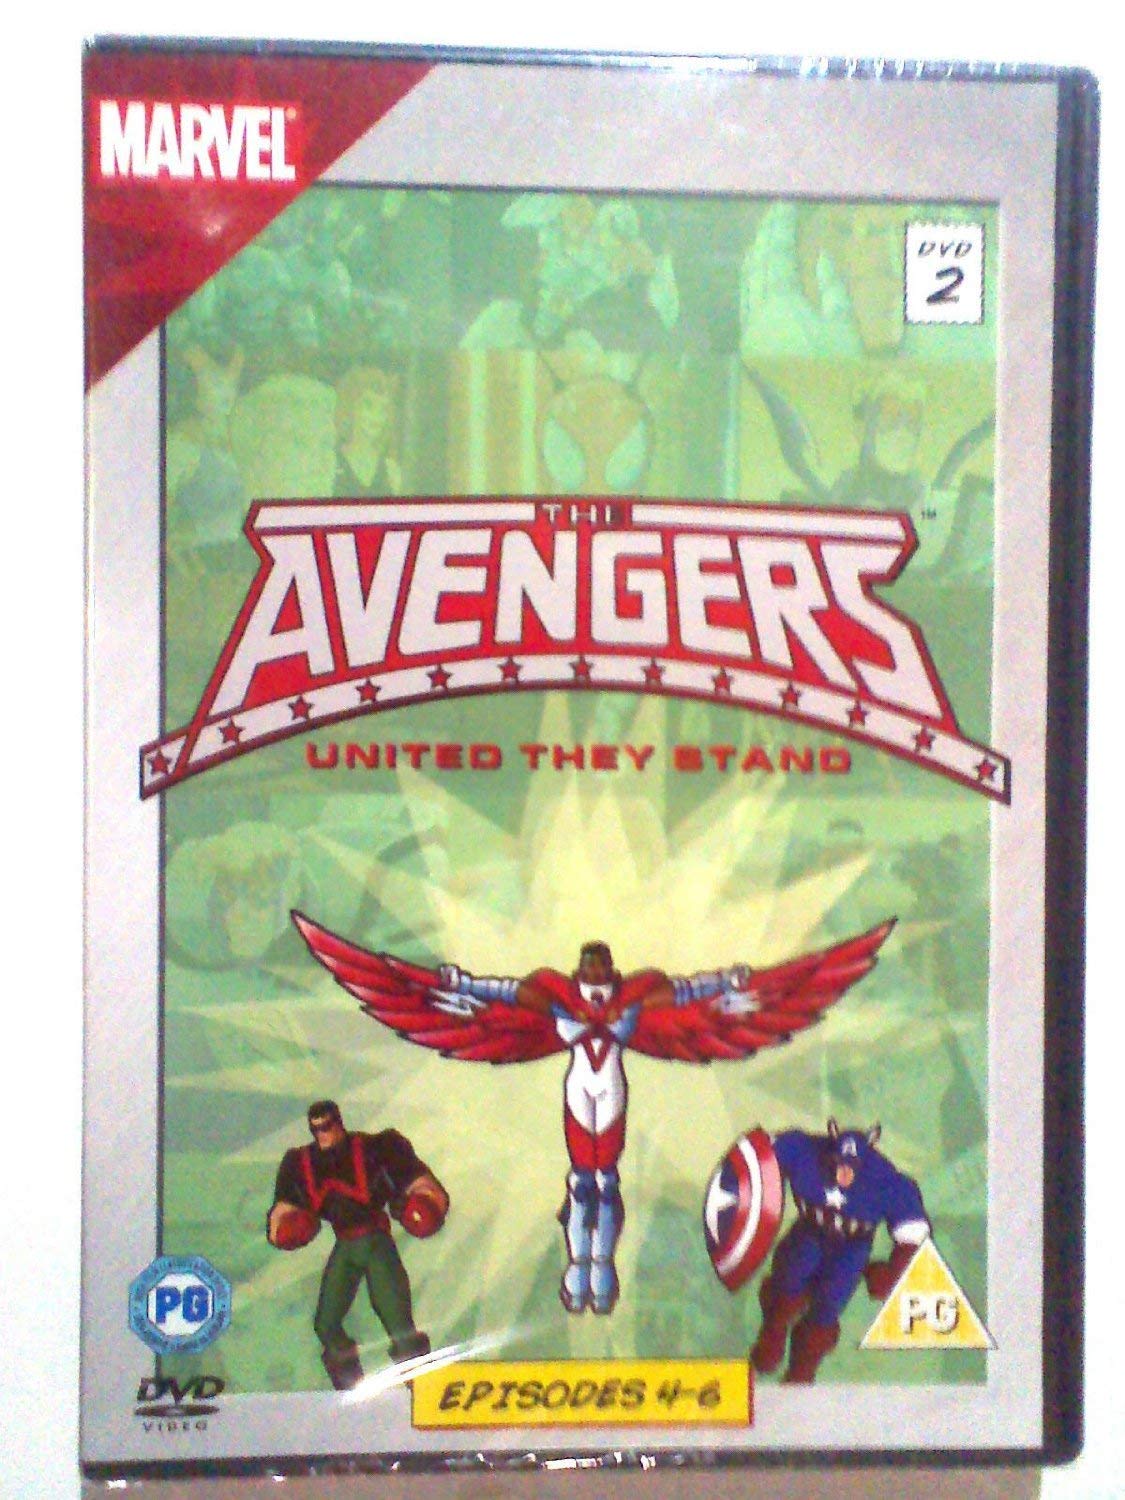 The Avengers - United They Stand - DVD